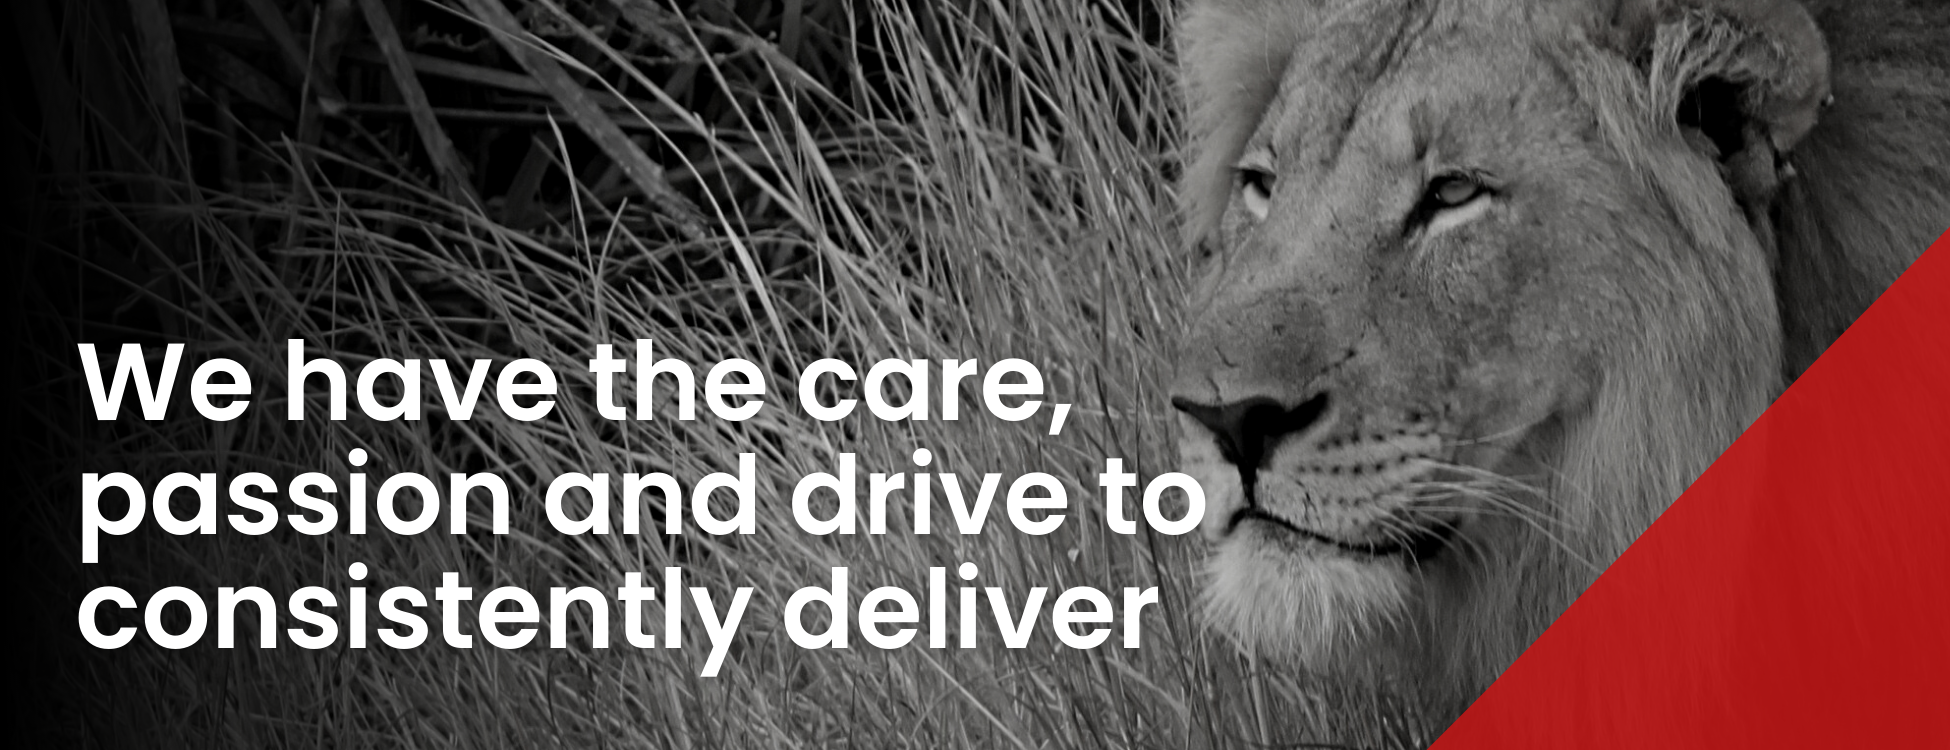 We have the care, passion and drive to consistently deliver